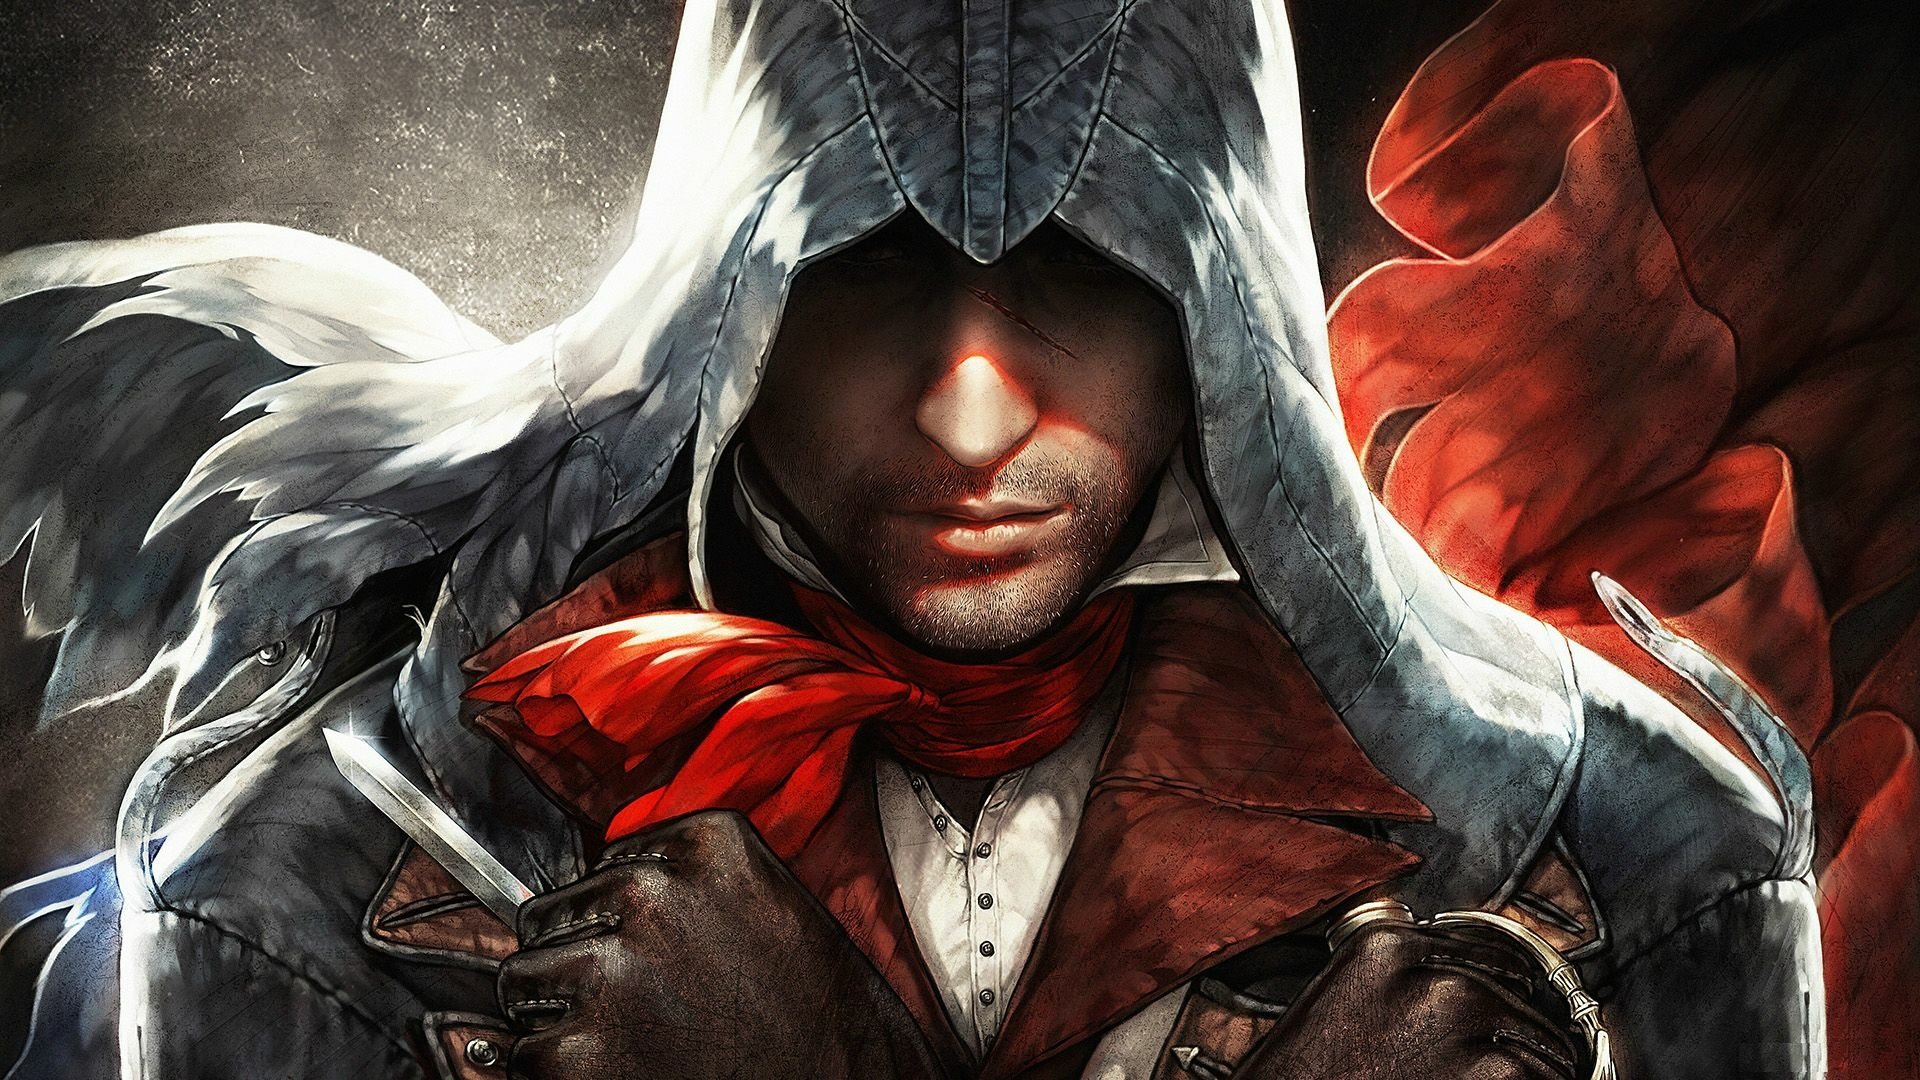 HD desktop wallpaper featuring Arno Dorian from Assassin's Creed: Unity, dressed in his iconic white hood and red scarf.